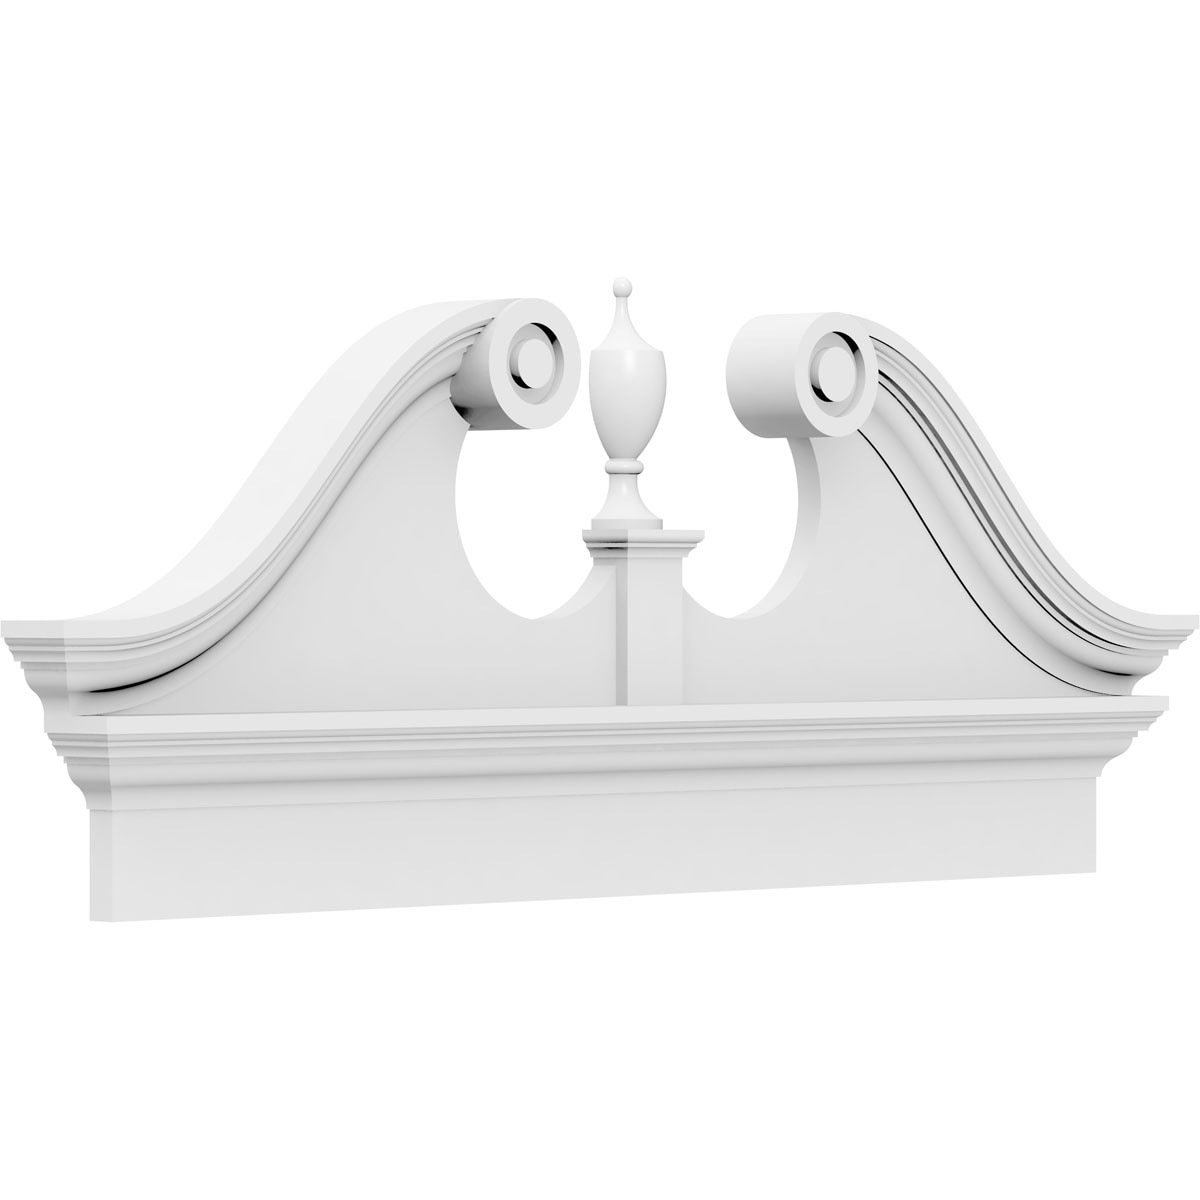 Ekena Millwork Rams Head 58-in x 21-3/8-in Unfinished PVC Pediment Entry Door Casing Accent in White | PEDPC058X215RHP00